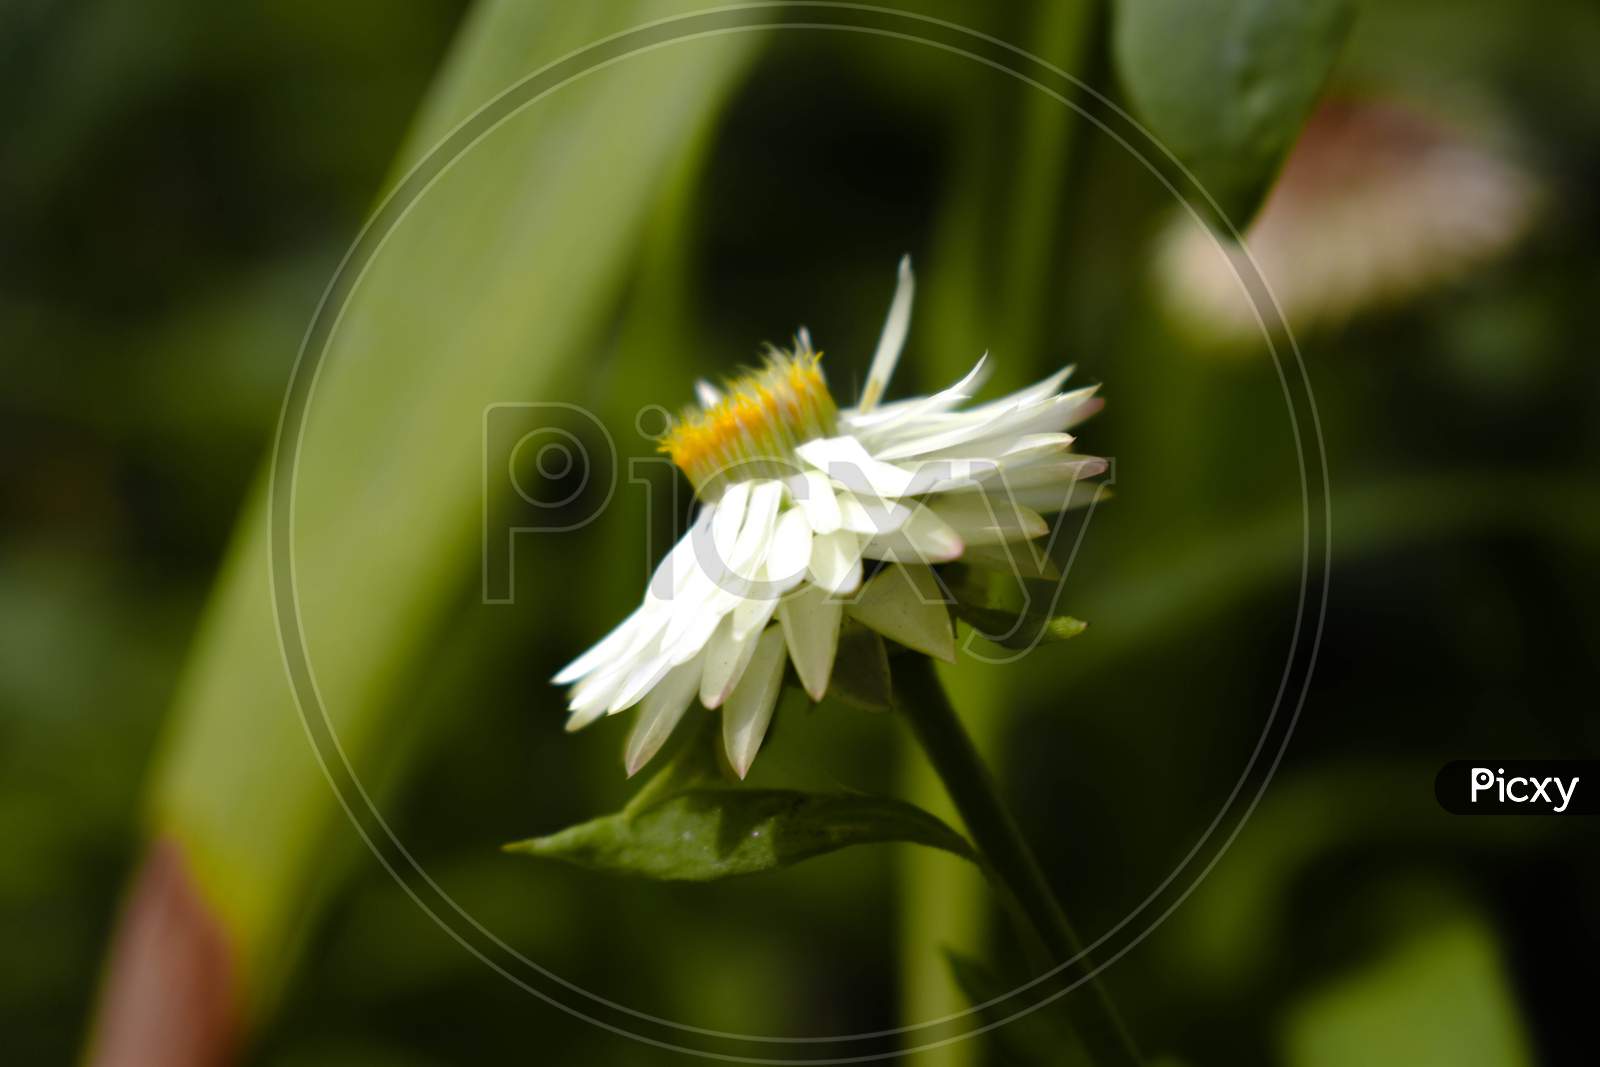 Close-up of a white flower.